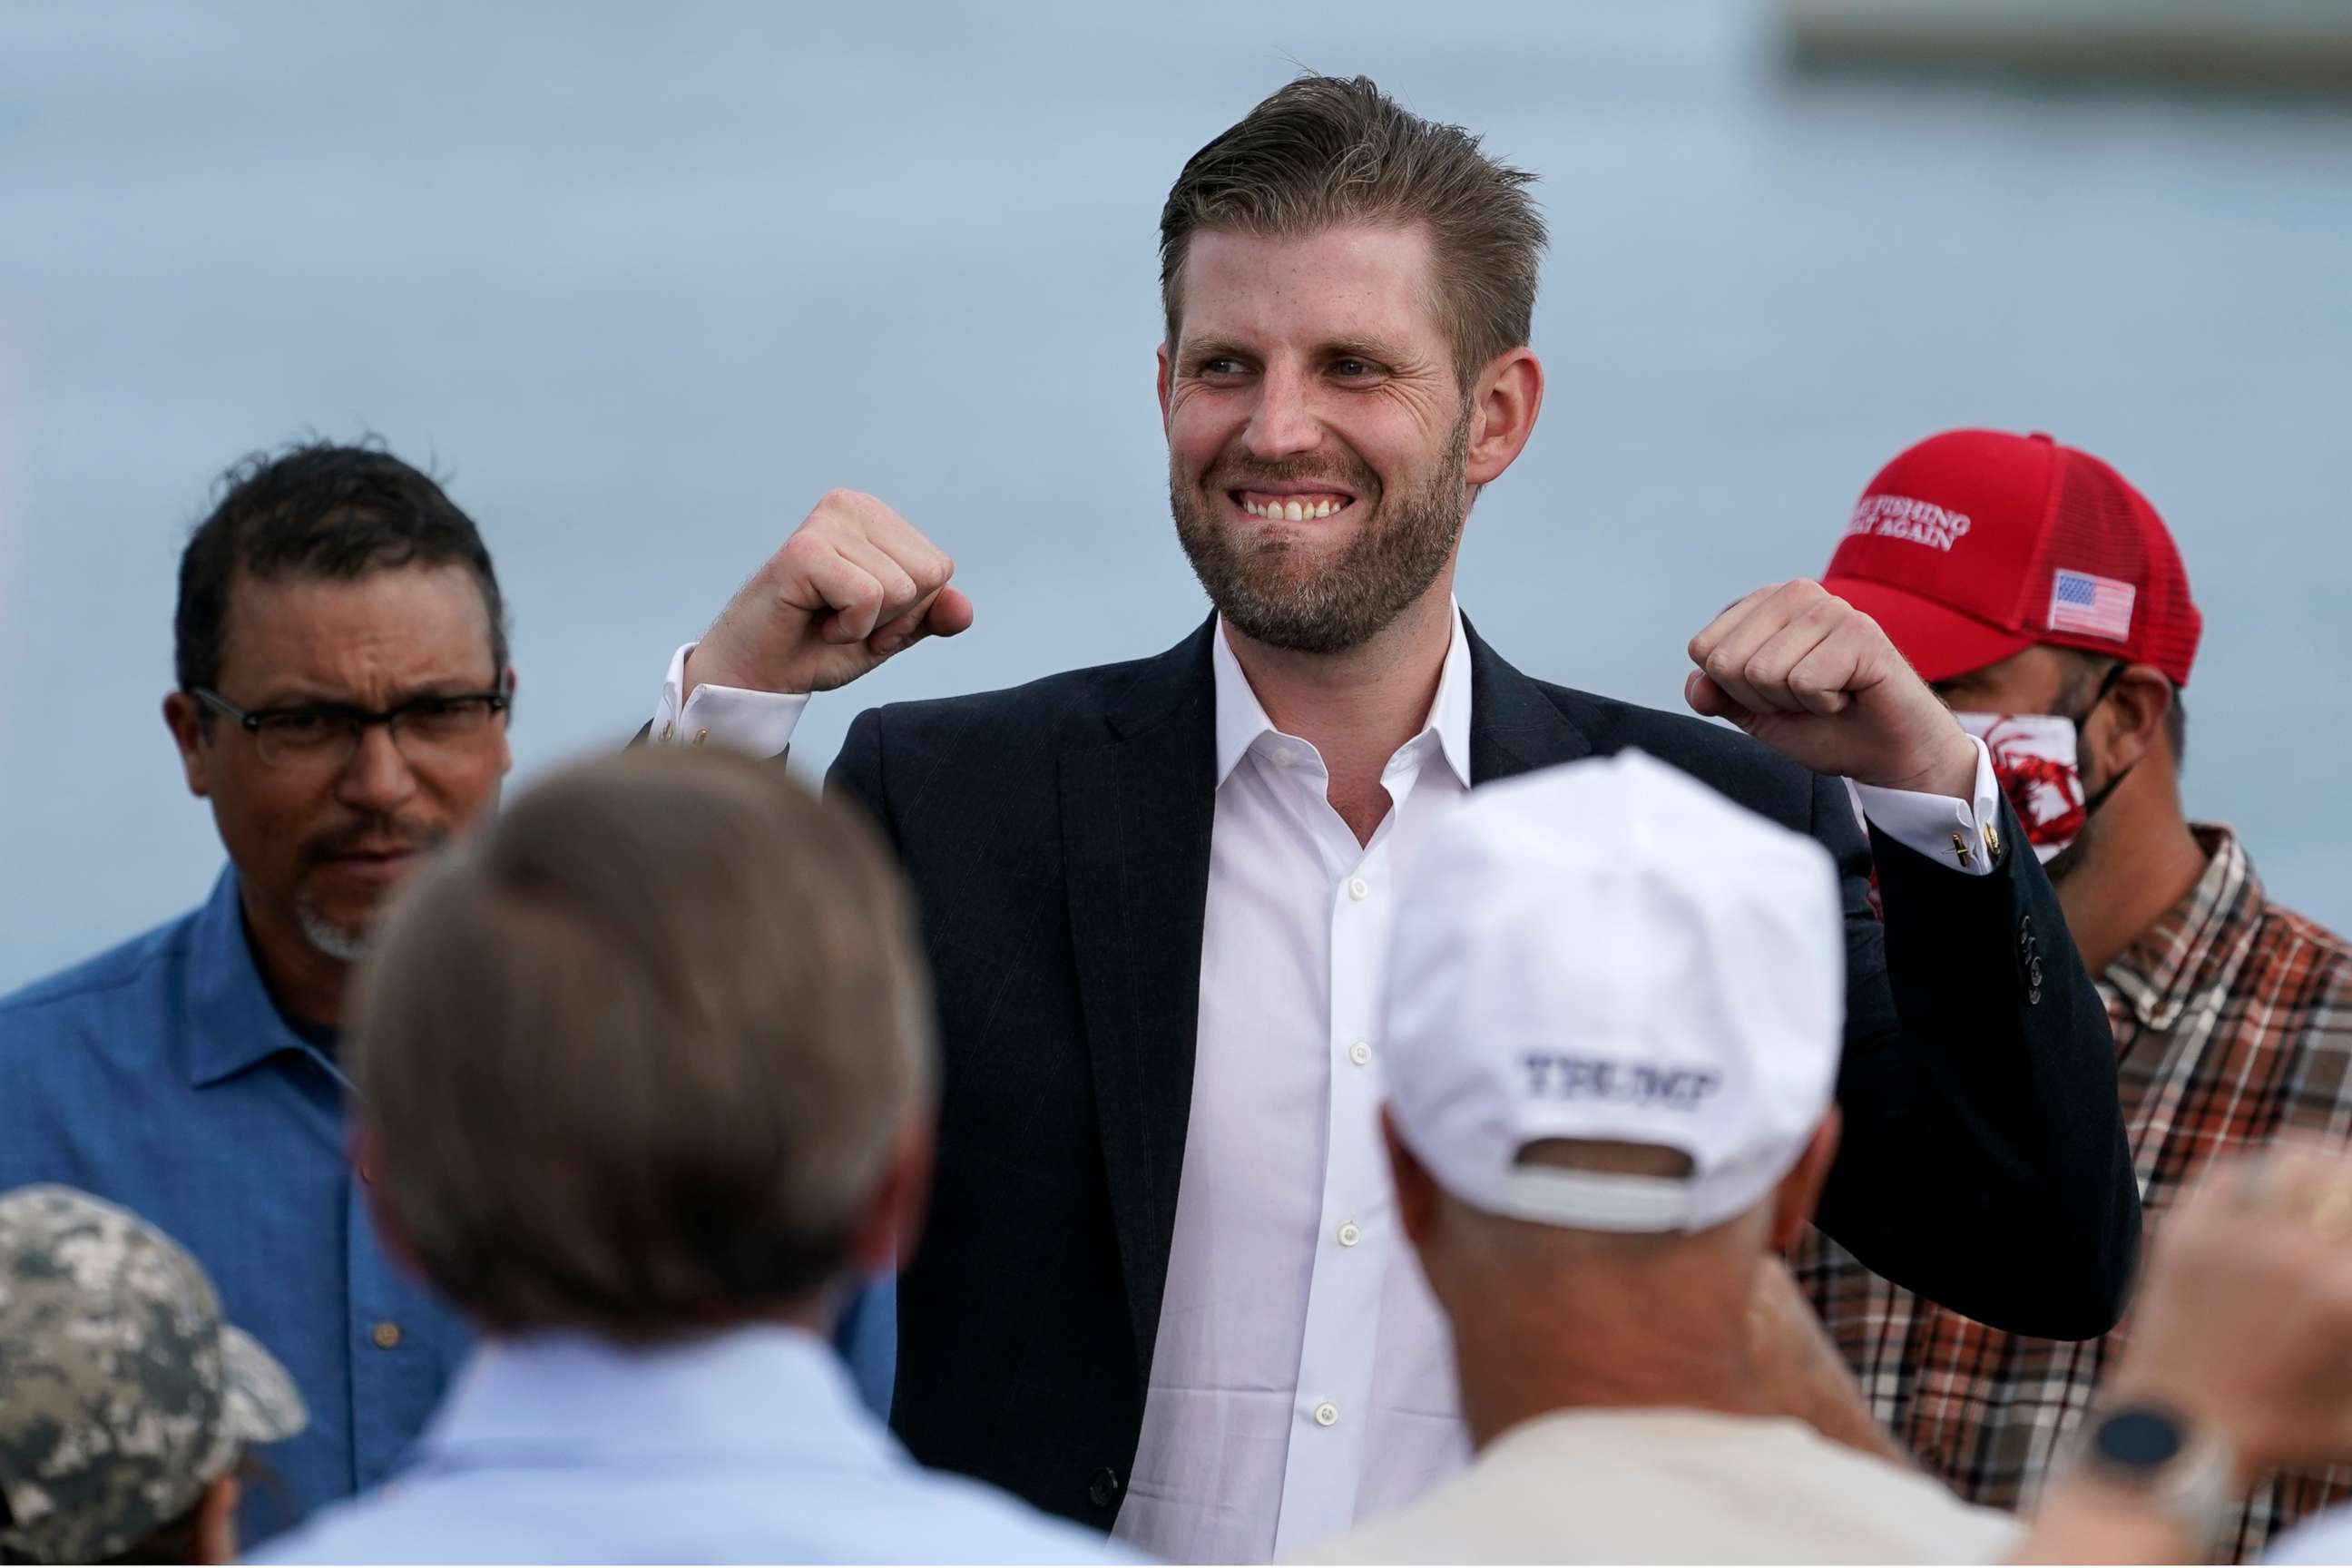 PHOTO: Eric Trump, the son of President Donald Trump, speaks at a campaign rally for his father, Tuesday, Sept. 17, 2020, in Saco, Maine.